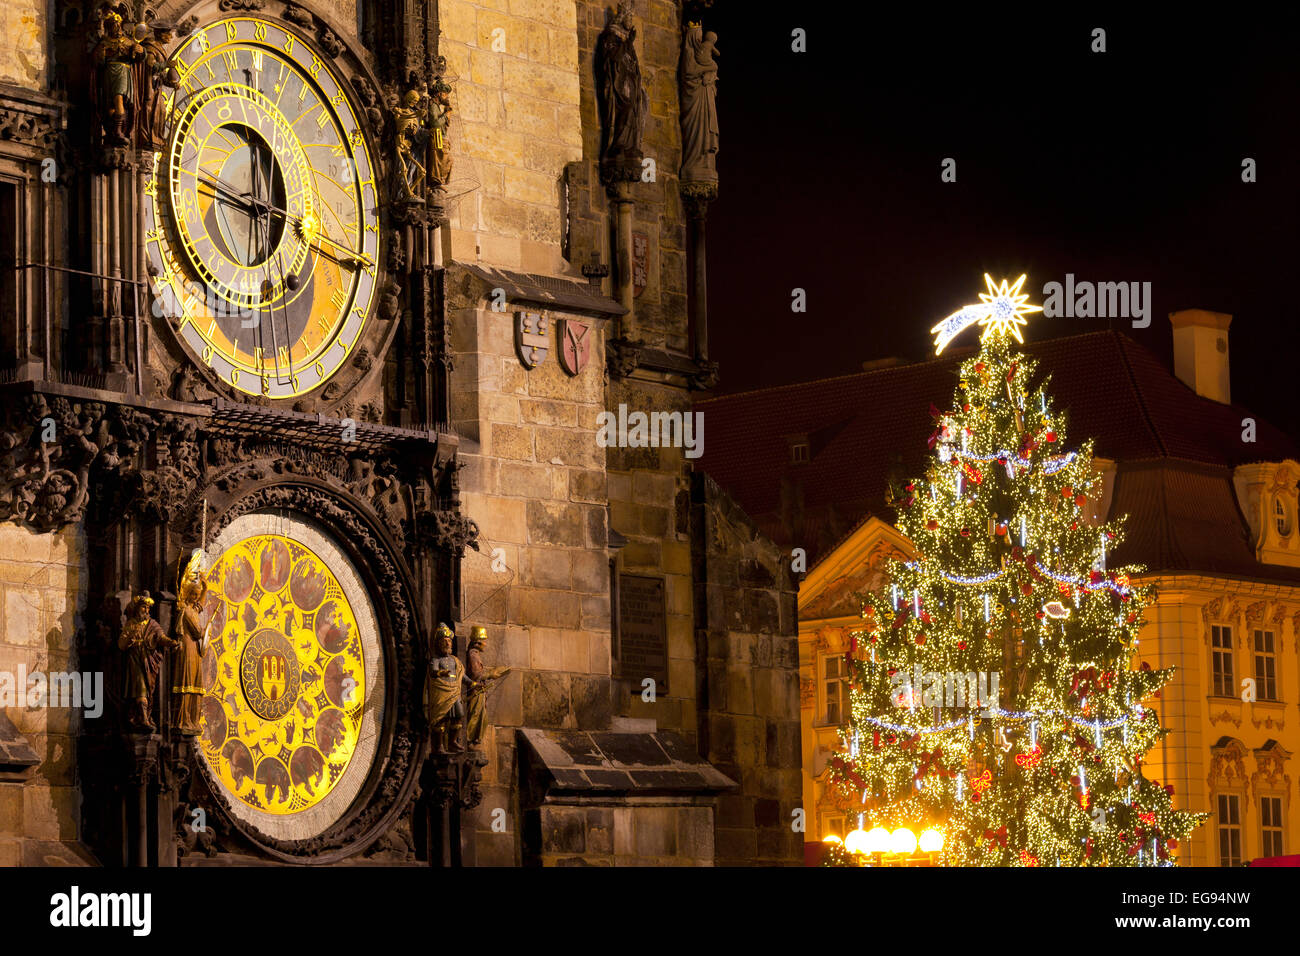 The Astronomical Clock and Church of Our Lady of Tyn, Old Town Square, Prague, Czech Republic Stock Photo